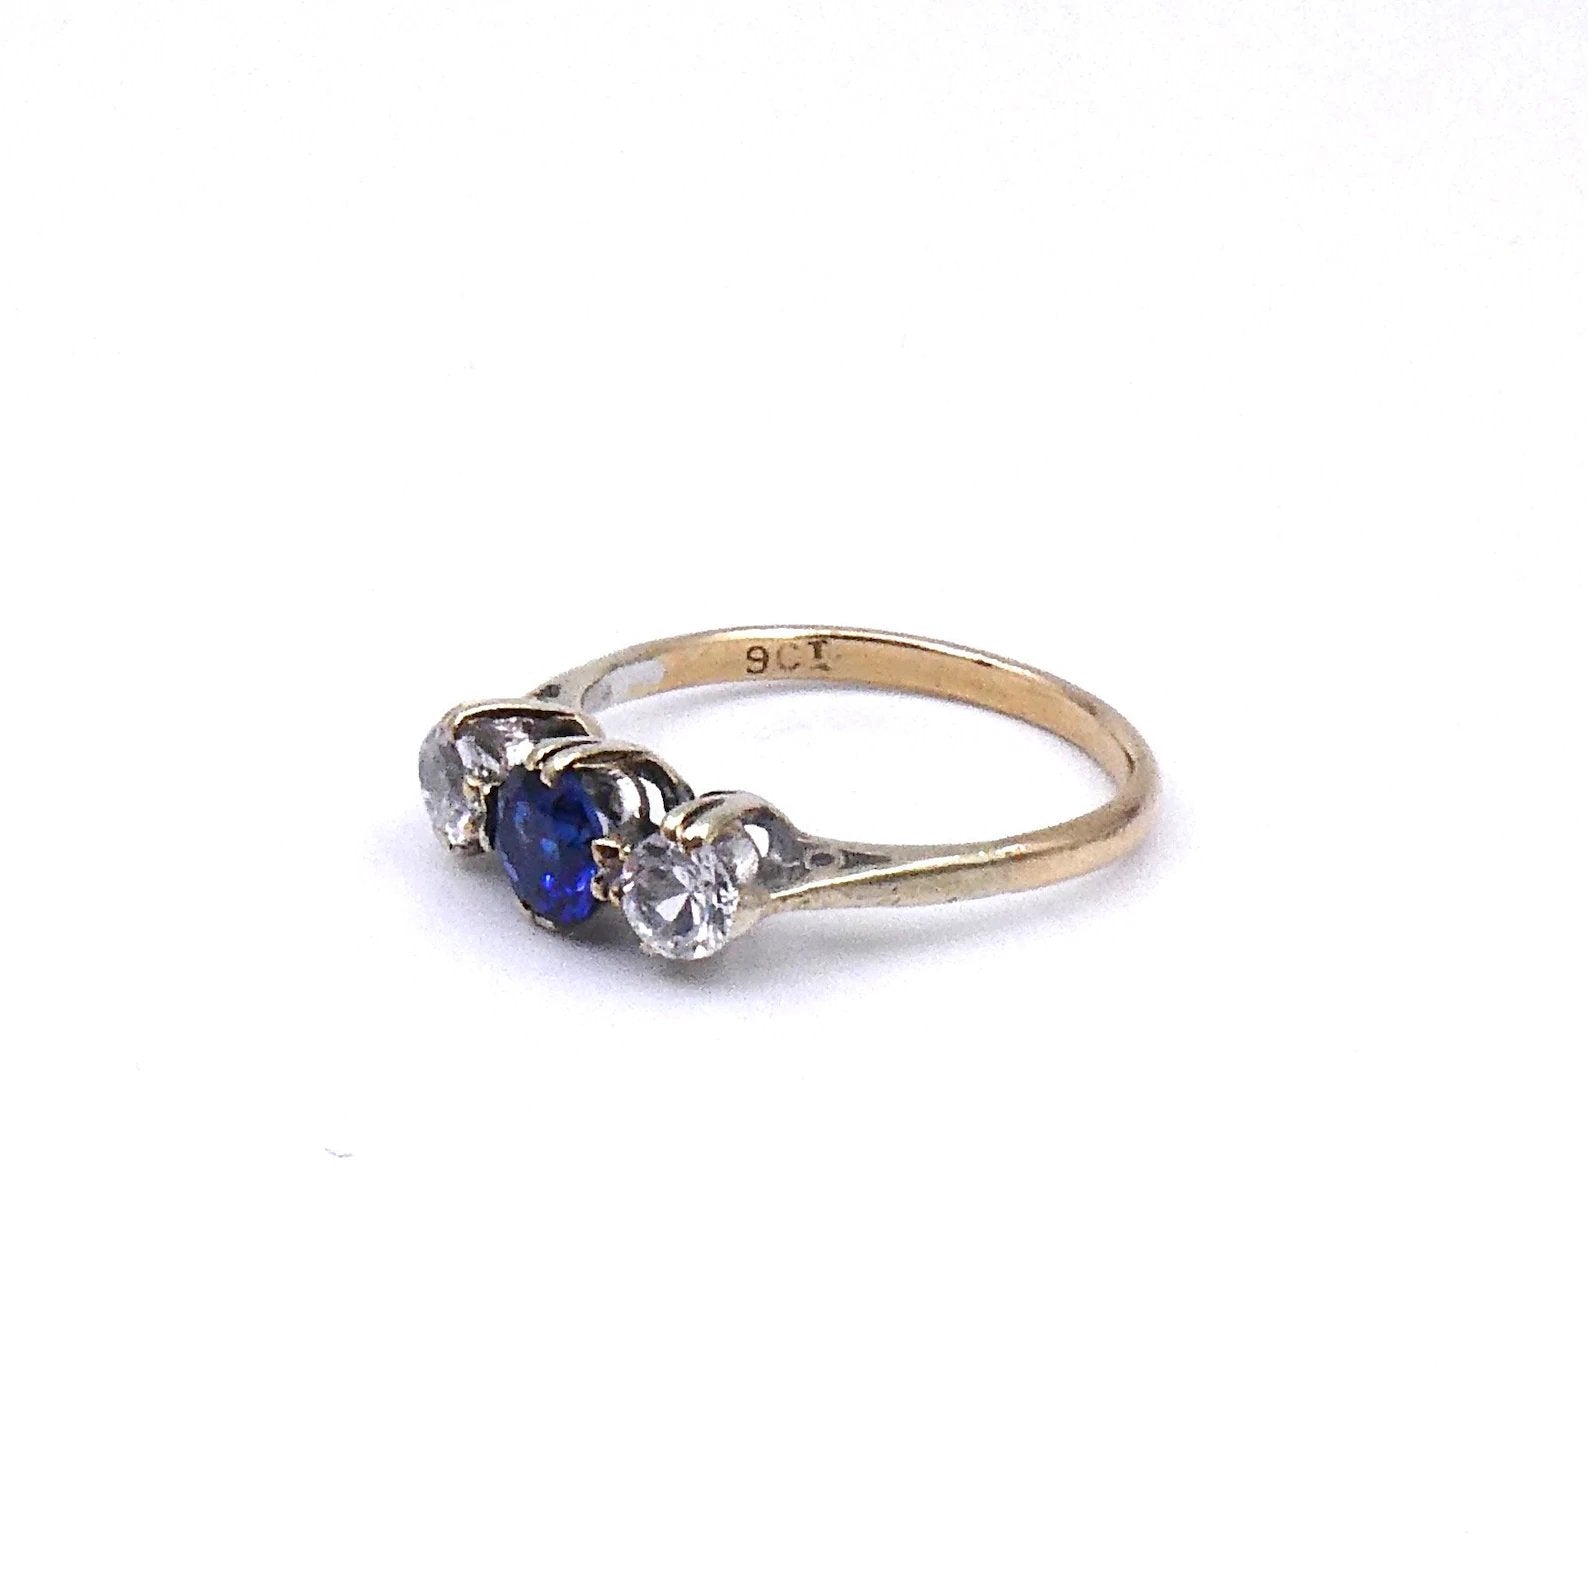 Vintage sapphire ring, three stone ring with a vibrant blue sapphire and quartz. - Collected